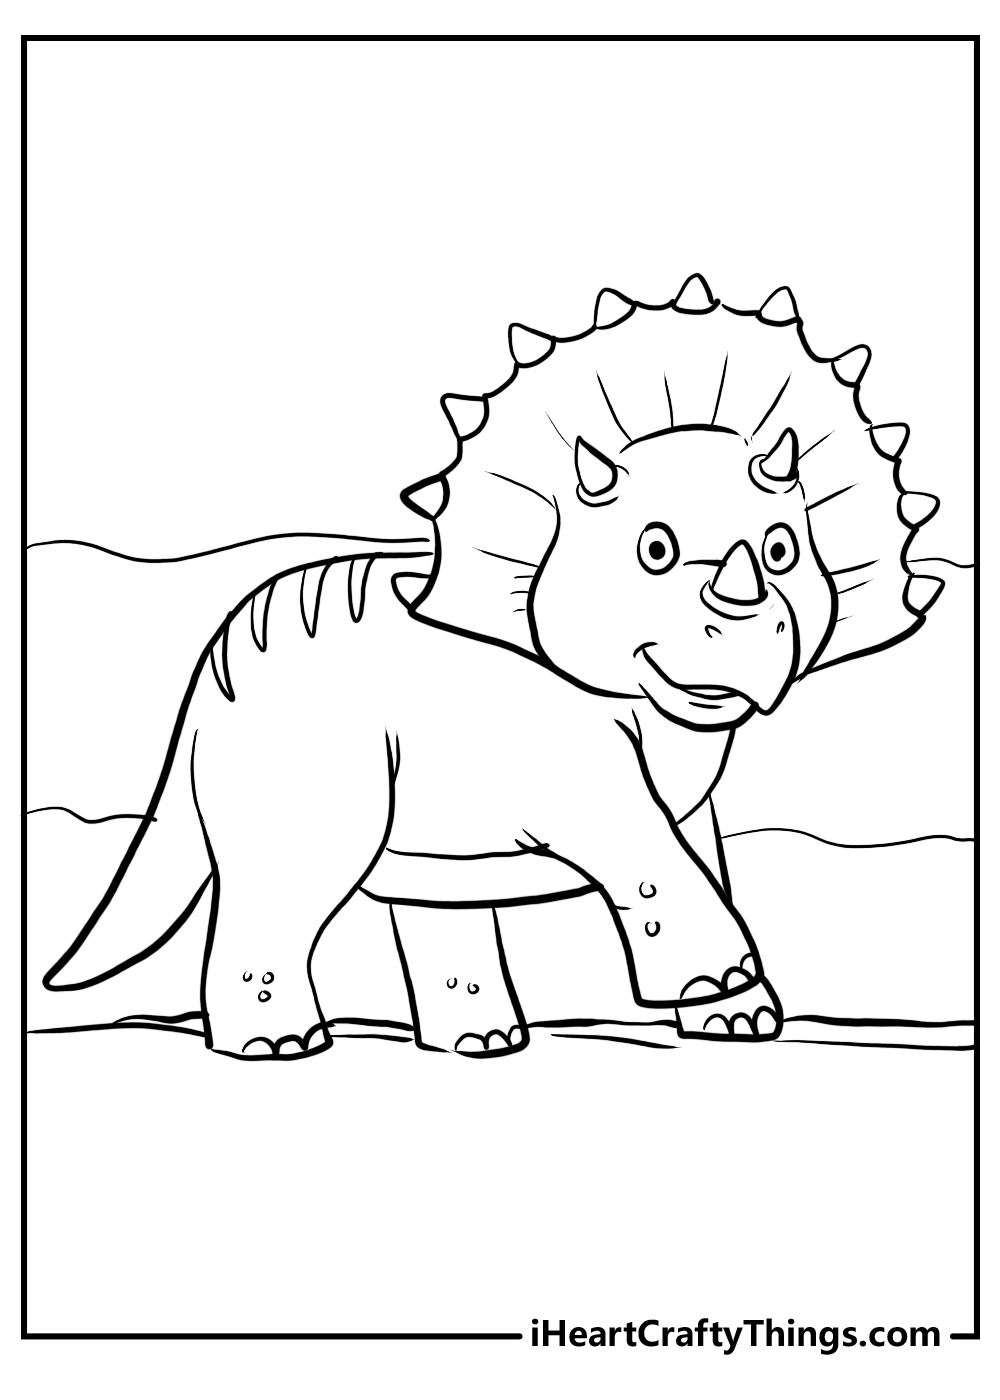 New Triceratops Coloring Pages for Kids